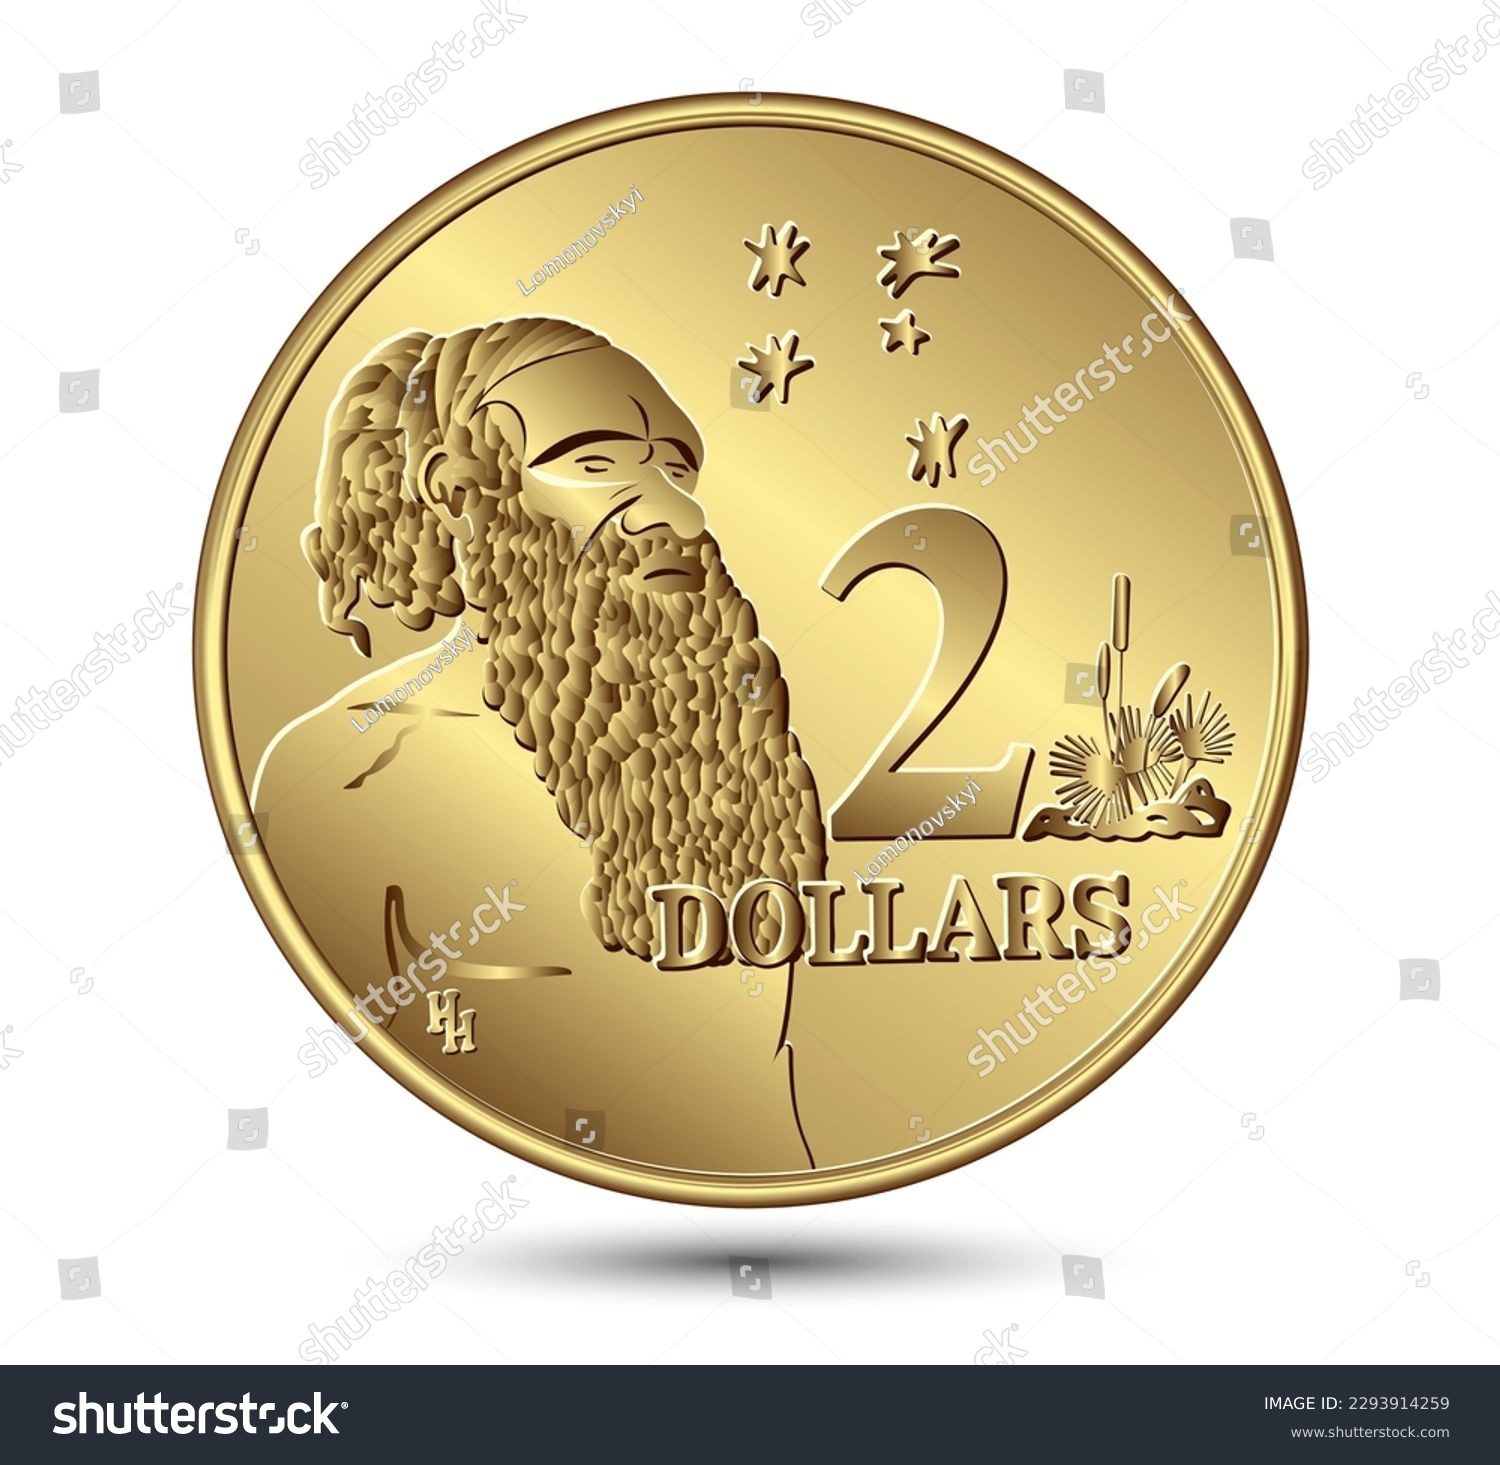 SVG of Reverse of Australian Two dollar coin isolated on white background. Vector illustration. svg